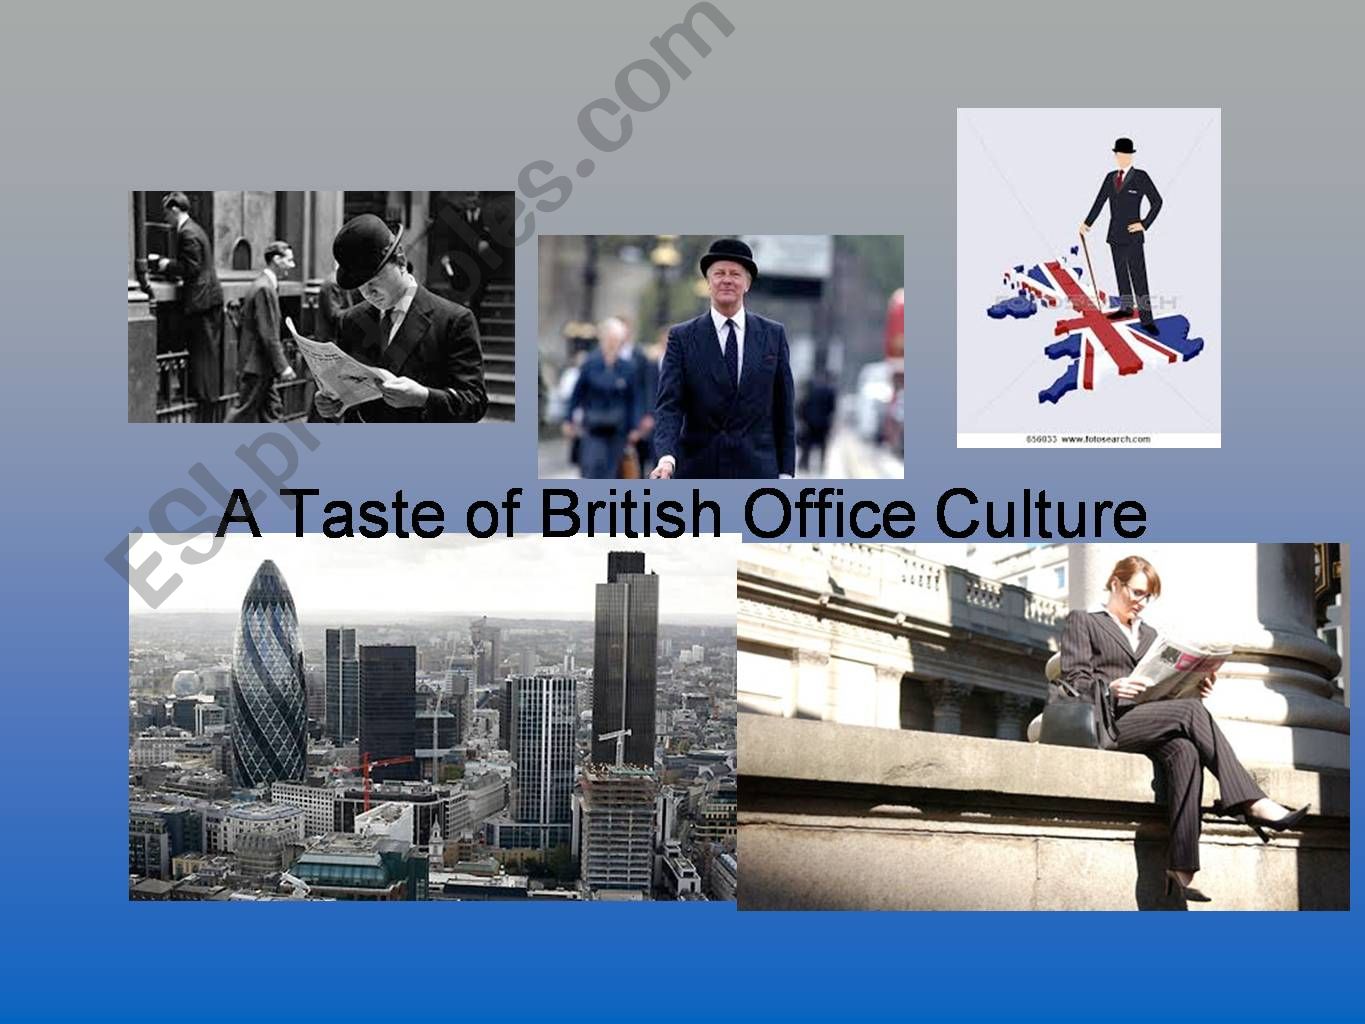 A Taste of British Office Culture